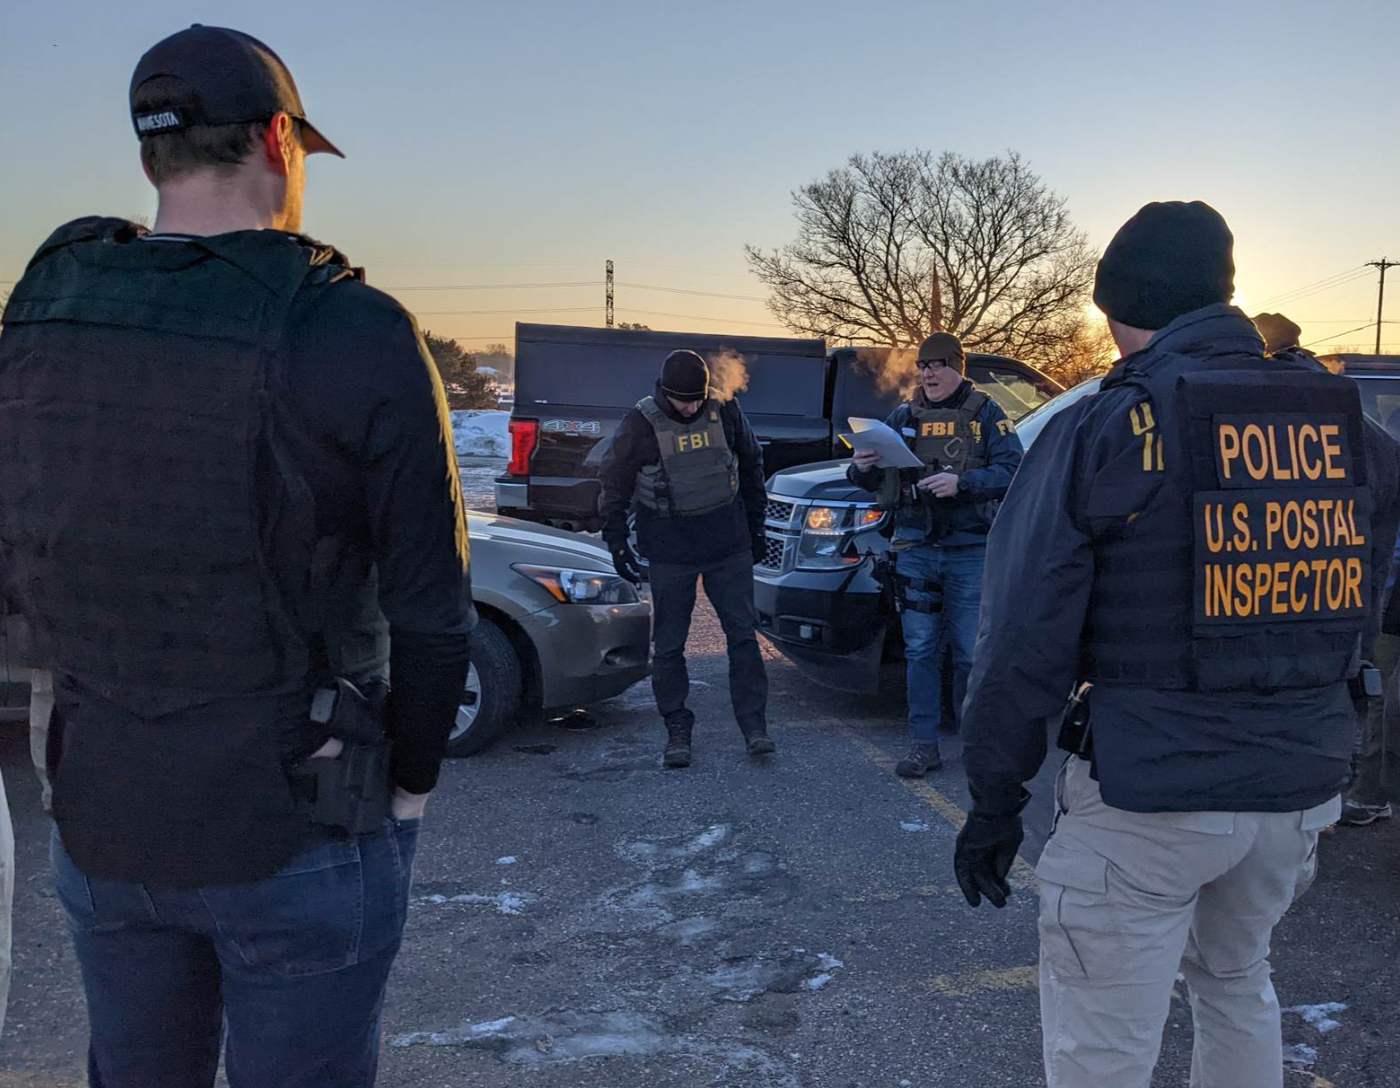 Executing Search Warrants in the Minneapolis COVID Fraud Investigation